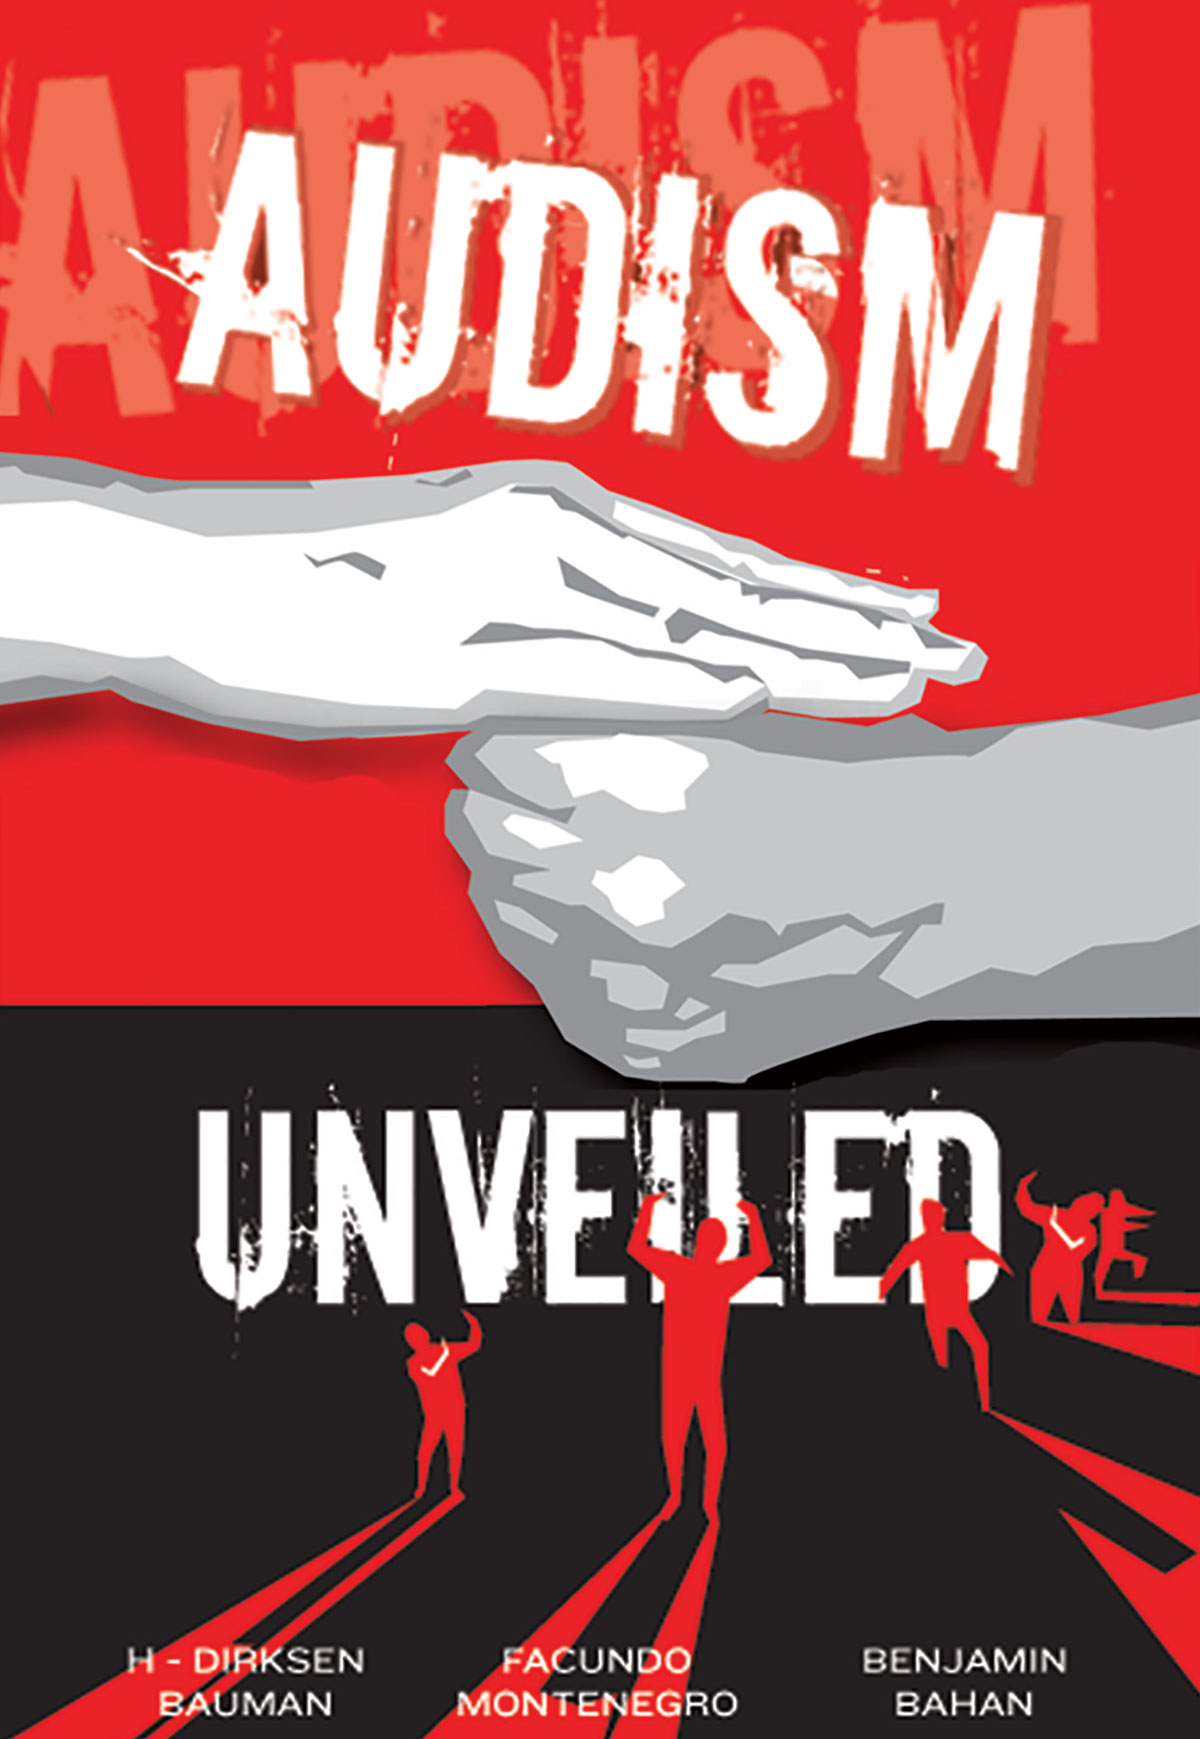 Audism Unveiled on a Red and Black background, a white hand lays flat on a darker hand held in a fist.